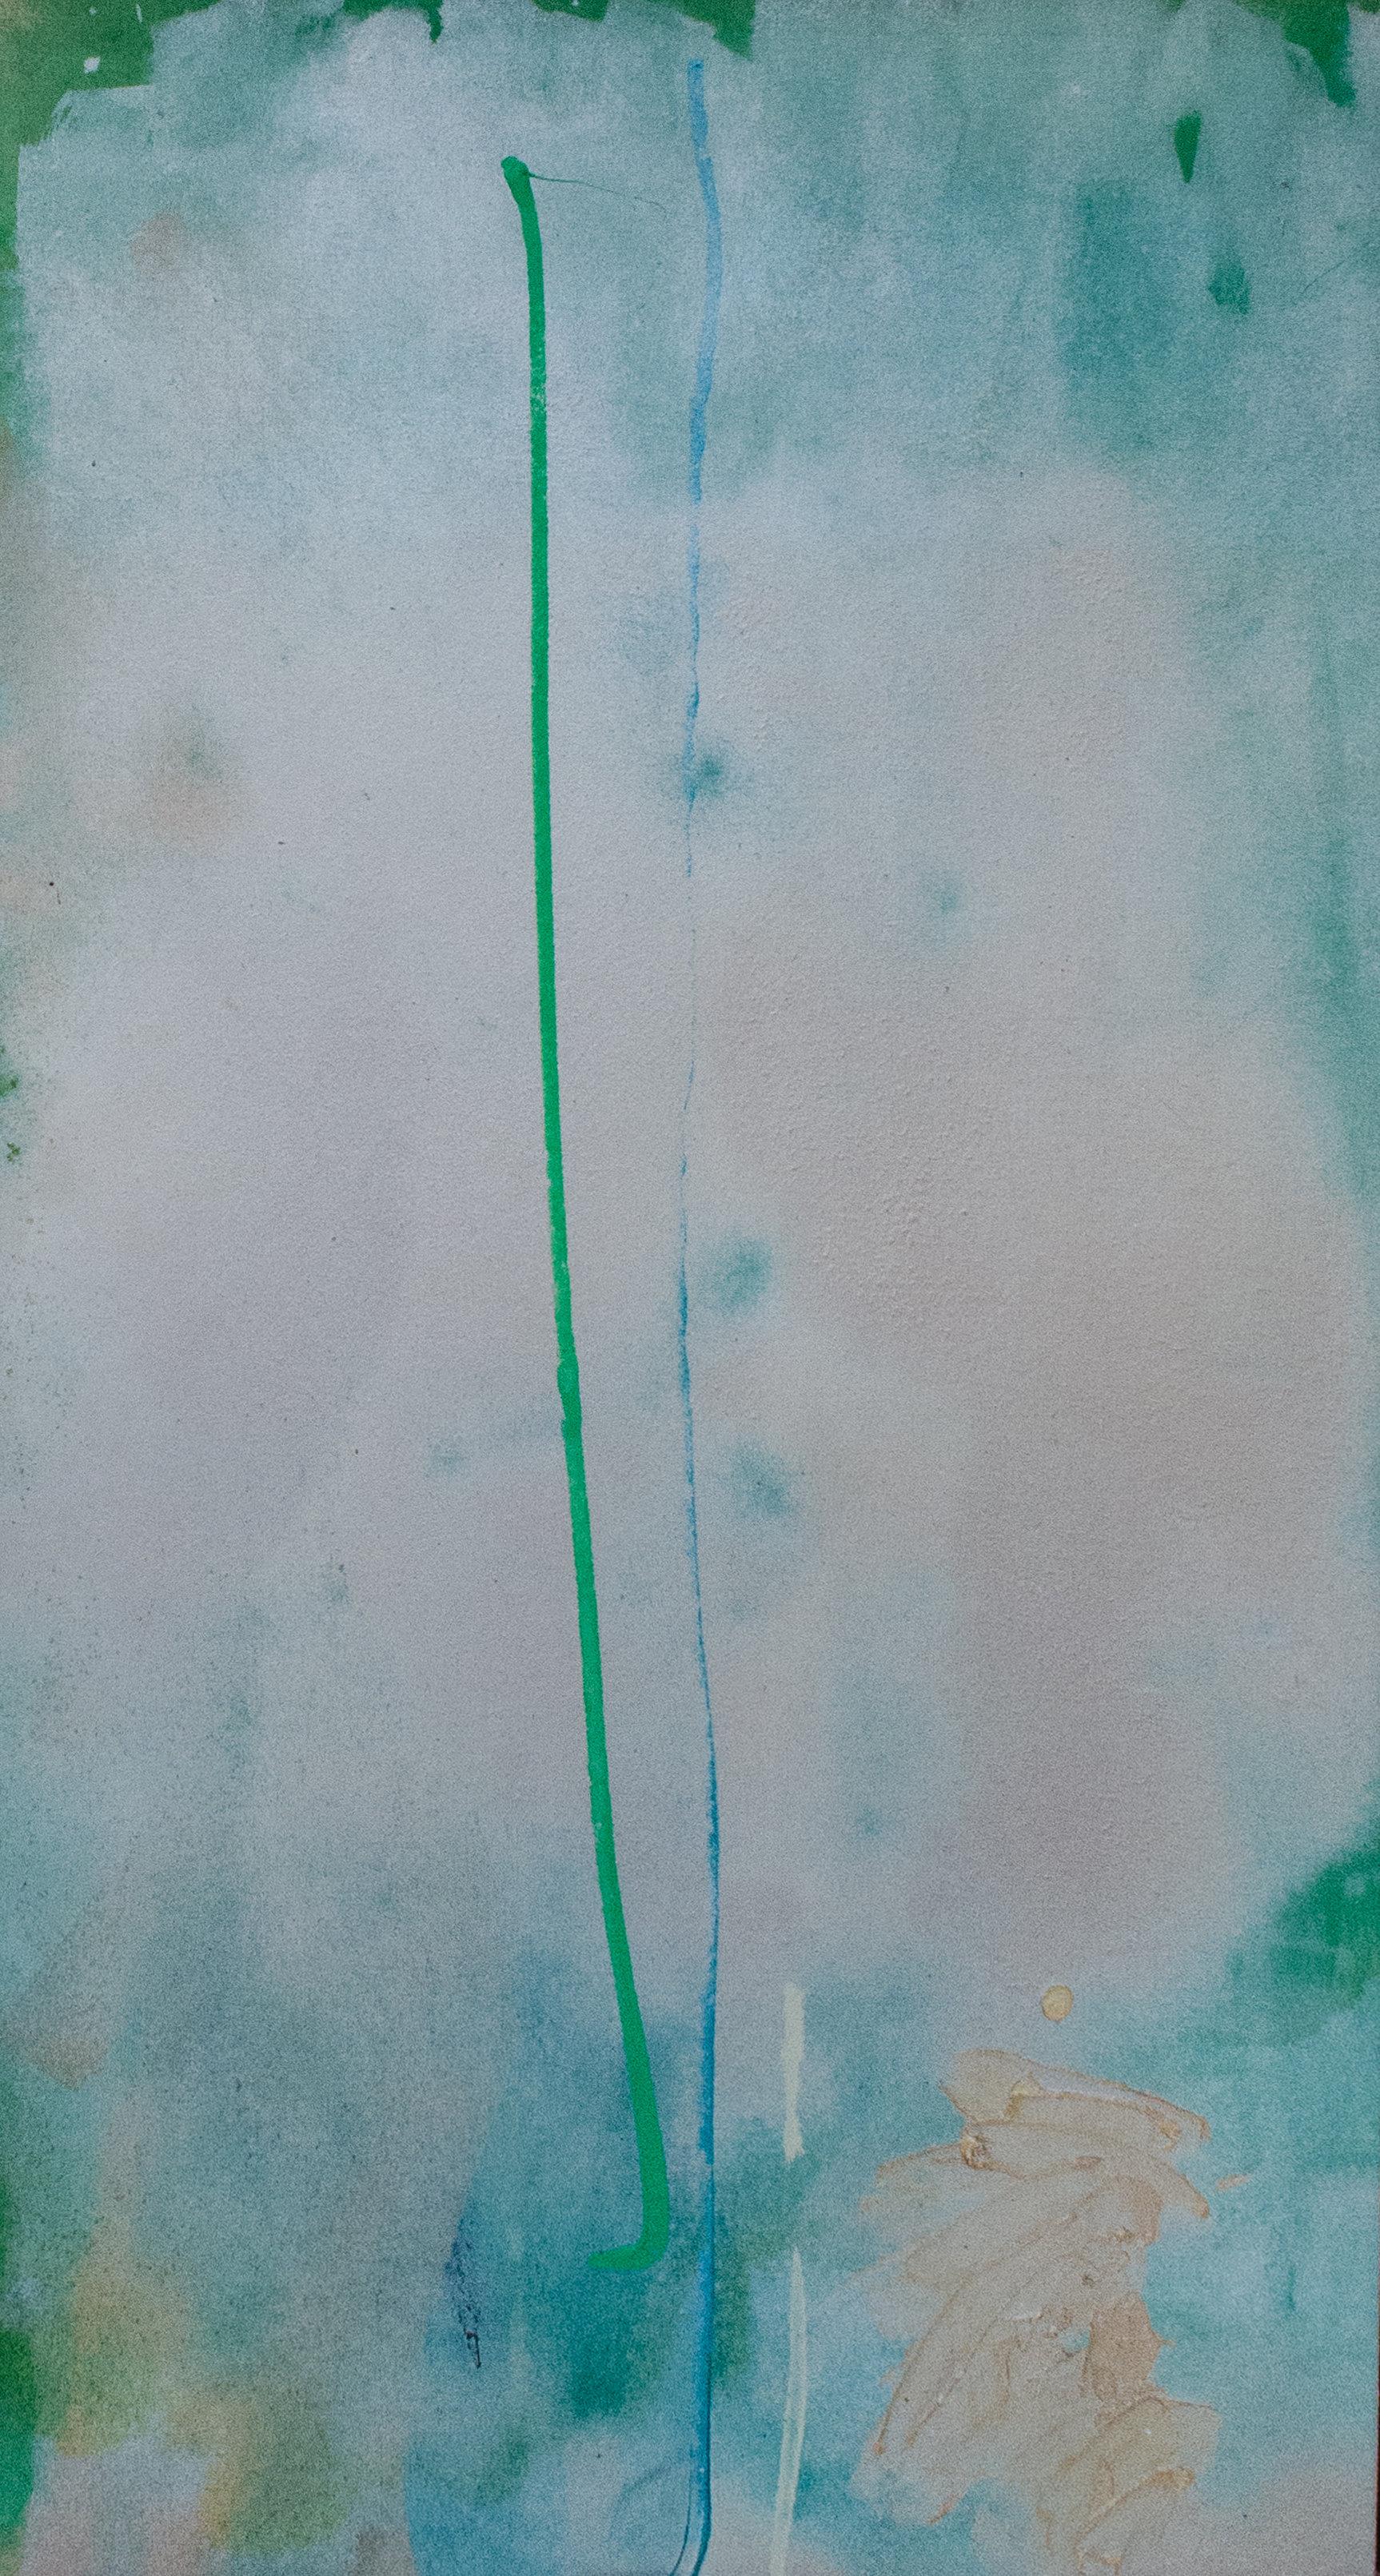 Sherron Francis
Untitled, 1976
Signed and dated on the reverse
Acrylic on canvas
52 x 28 inches

Artists such as Helen Frankenthaler, Morris Louis, Dan Christensen, and Sam Francis are already well-known names. However, Sherron Francis, a female